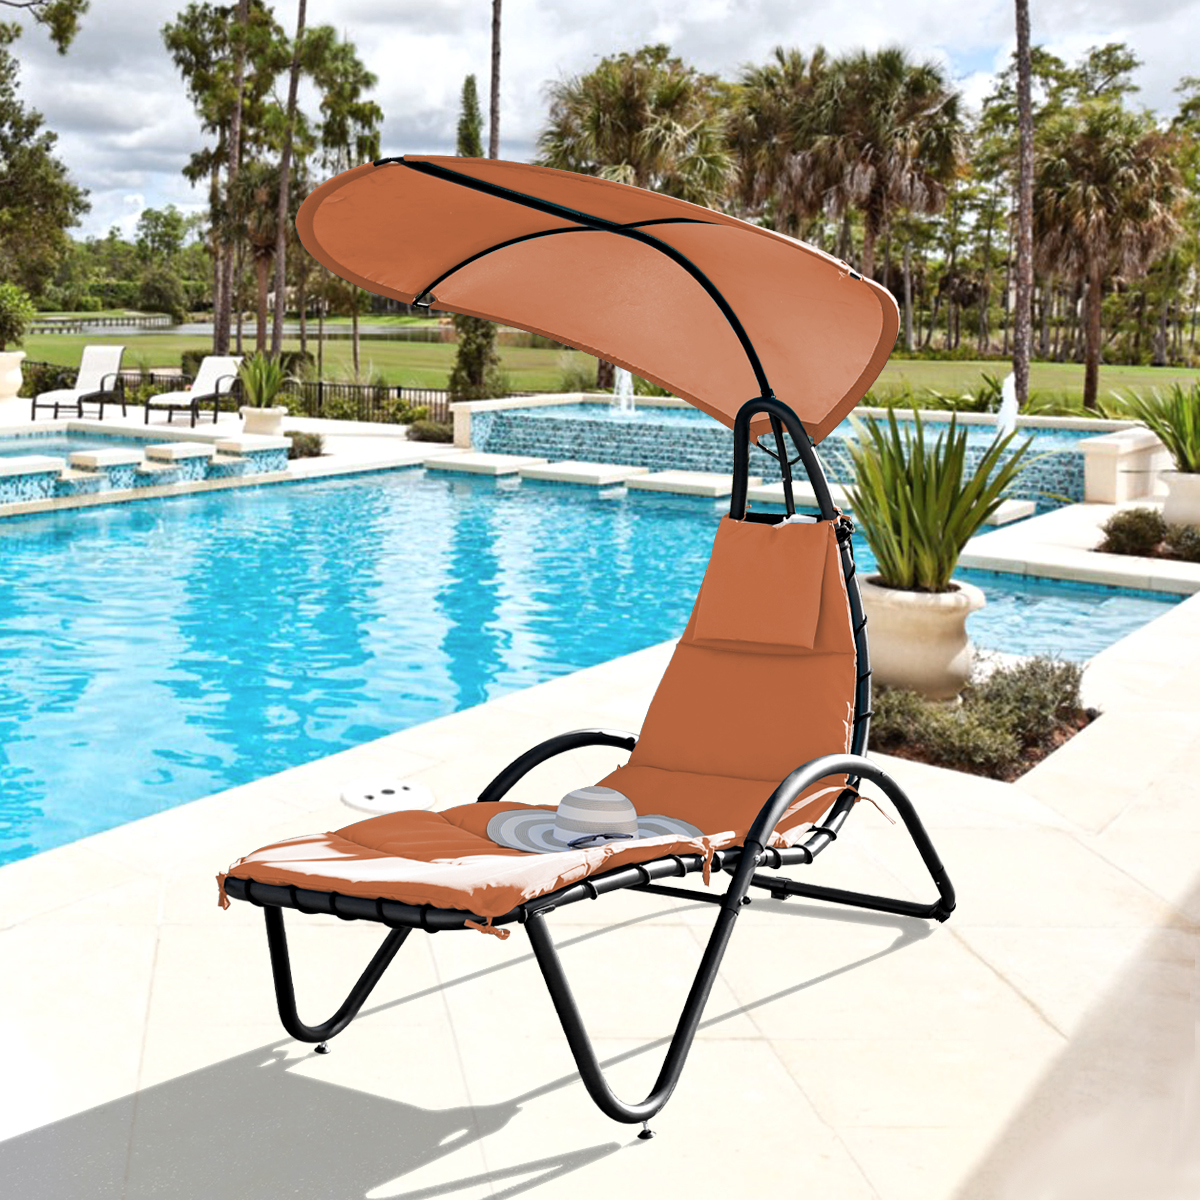 Hanging Chaise Lounger Chair Patio Porch Arc Swing Hammock Chair Canopy Outdoor [Orange] - image 2 of 8